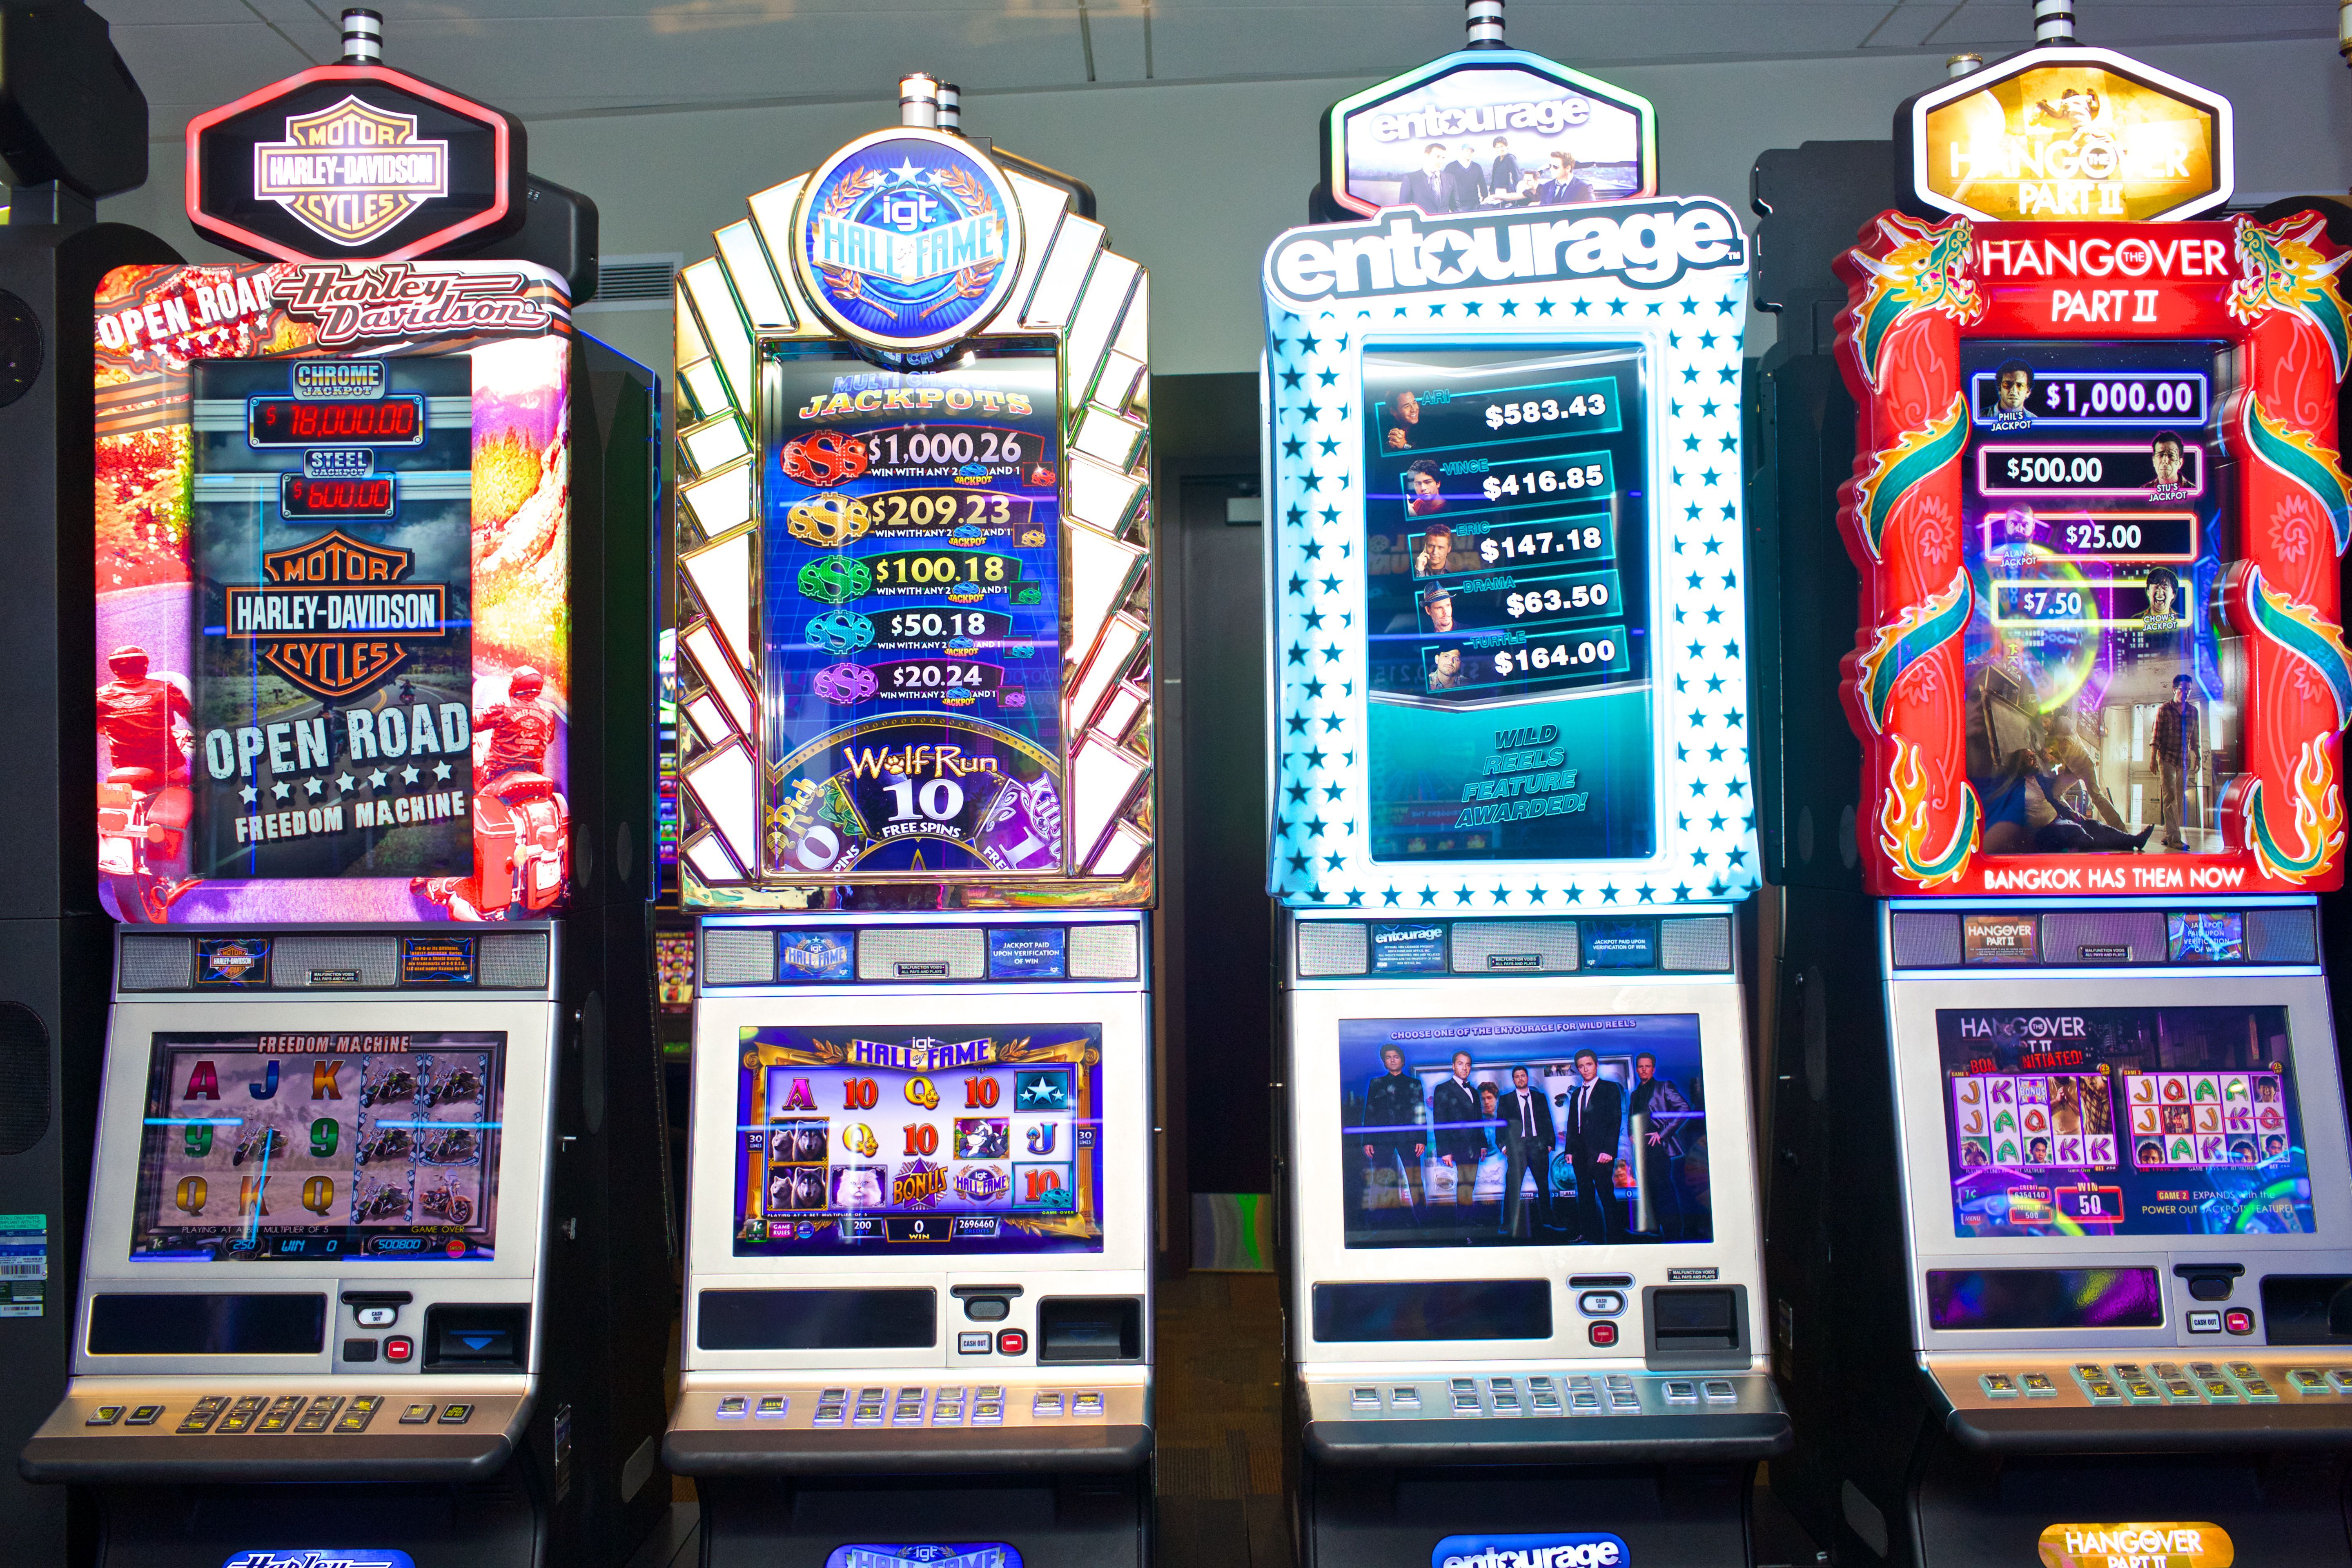 Slot Machines Perfected Addictive Gaming Now Tech Wants